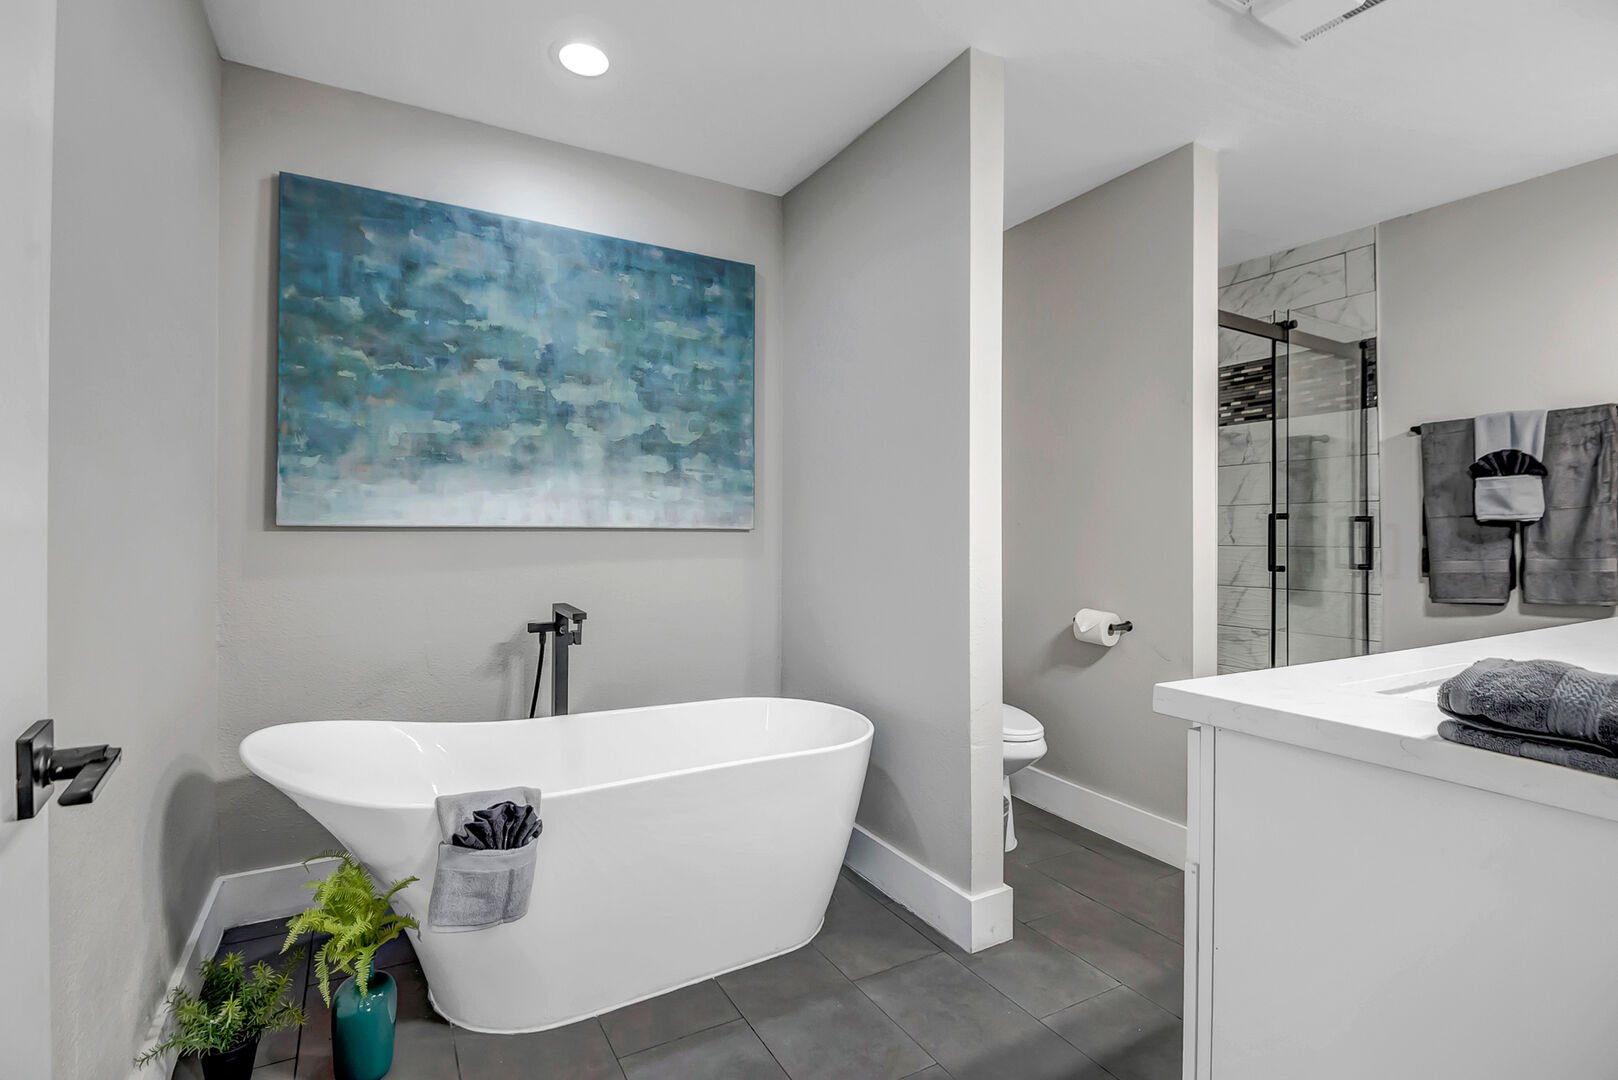 Master bathroom with double vanities, soaking tub and separate walk-in shower